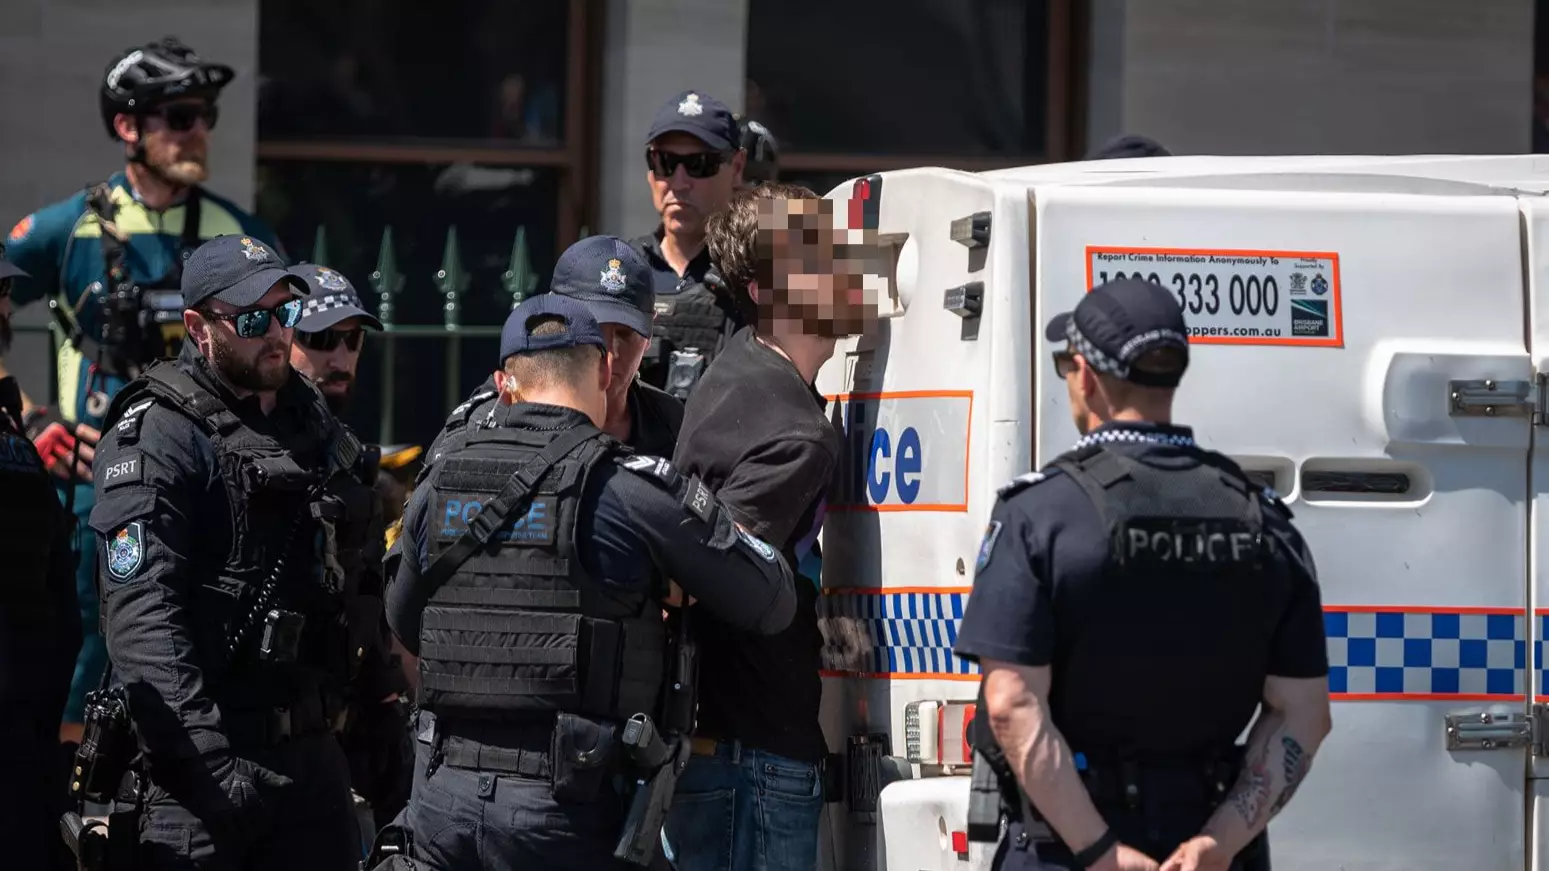 Home Affairs Minister Wants Climate Change Protestors To Pay For Police